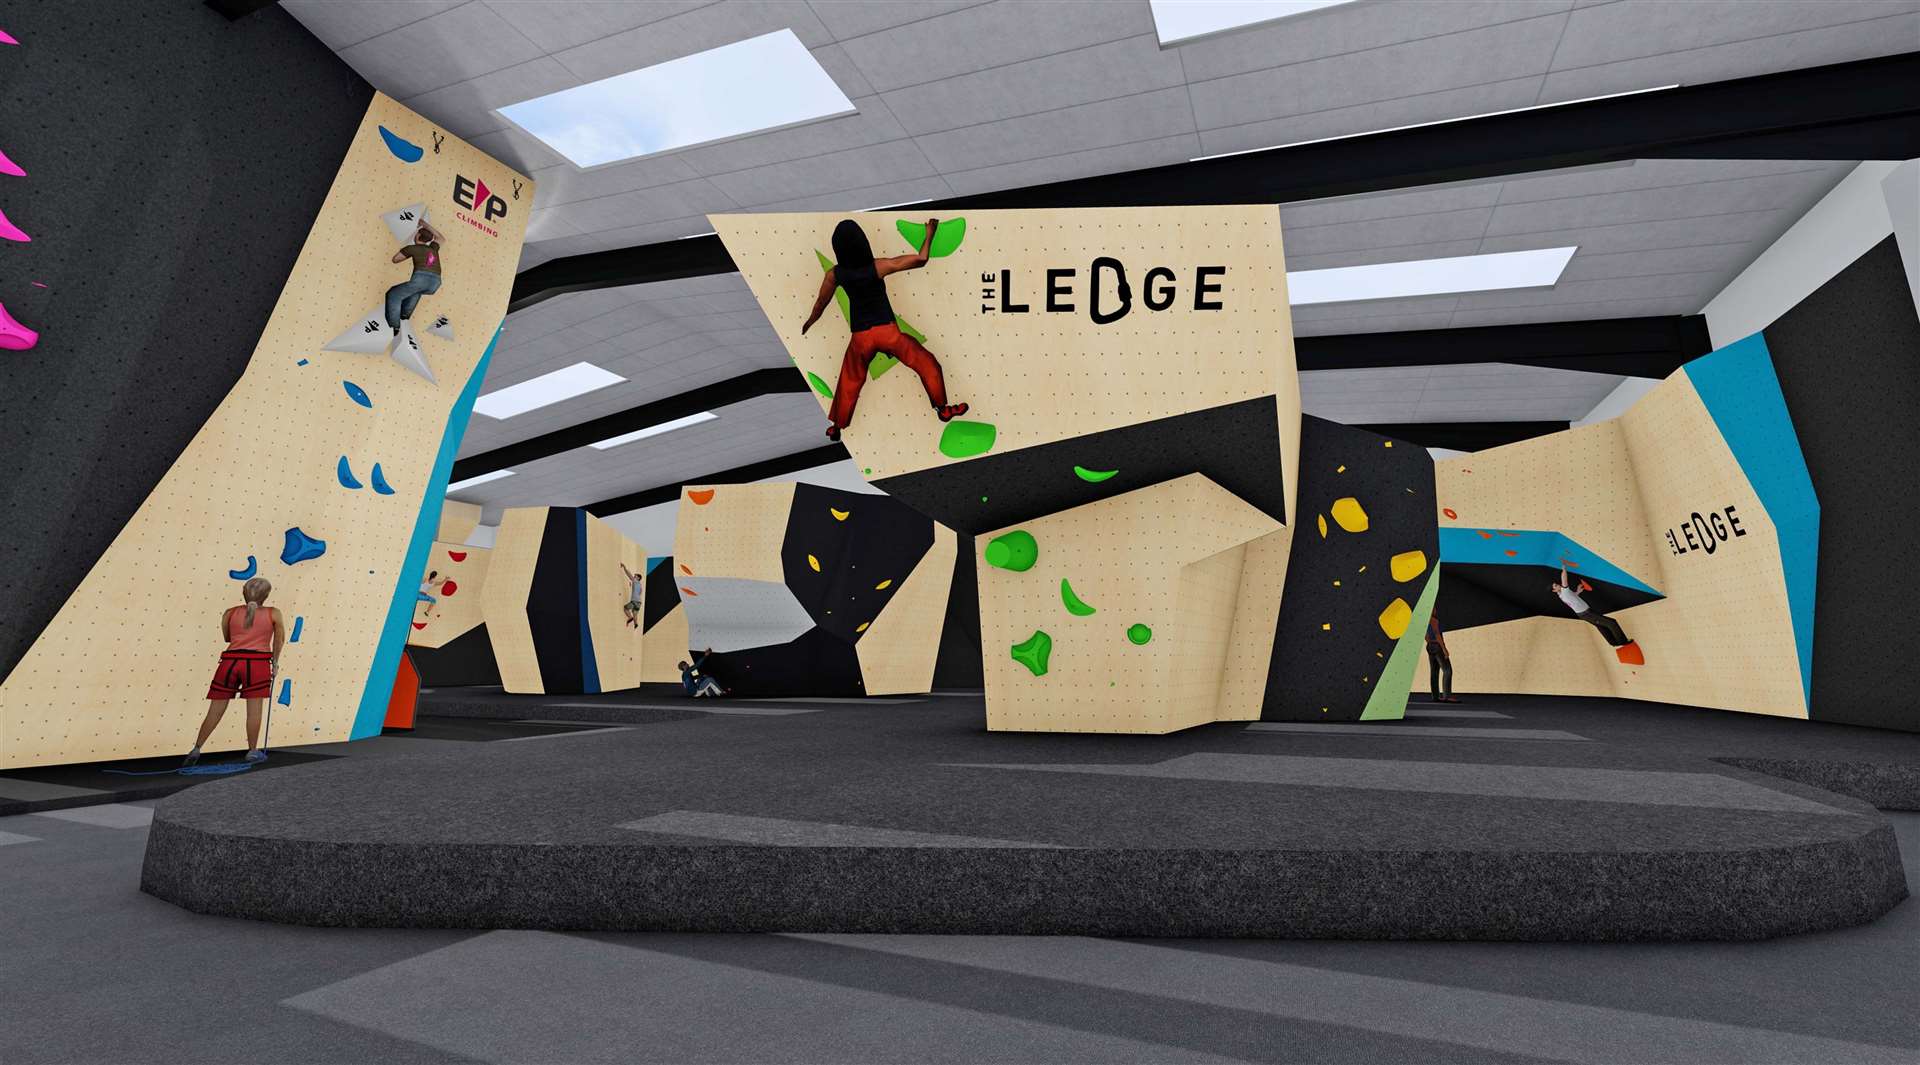 The Ledge climbing centre, which is being developed in Inverness, is set to become Scotland’s national bouldering centre of excellence.